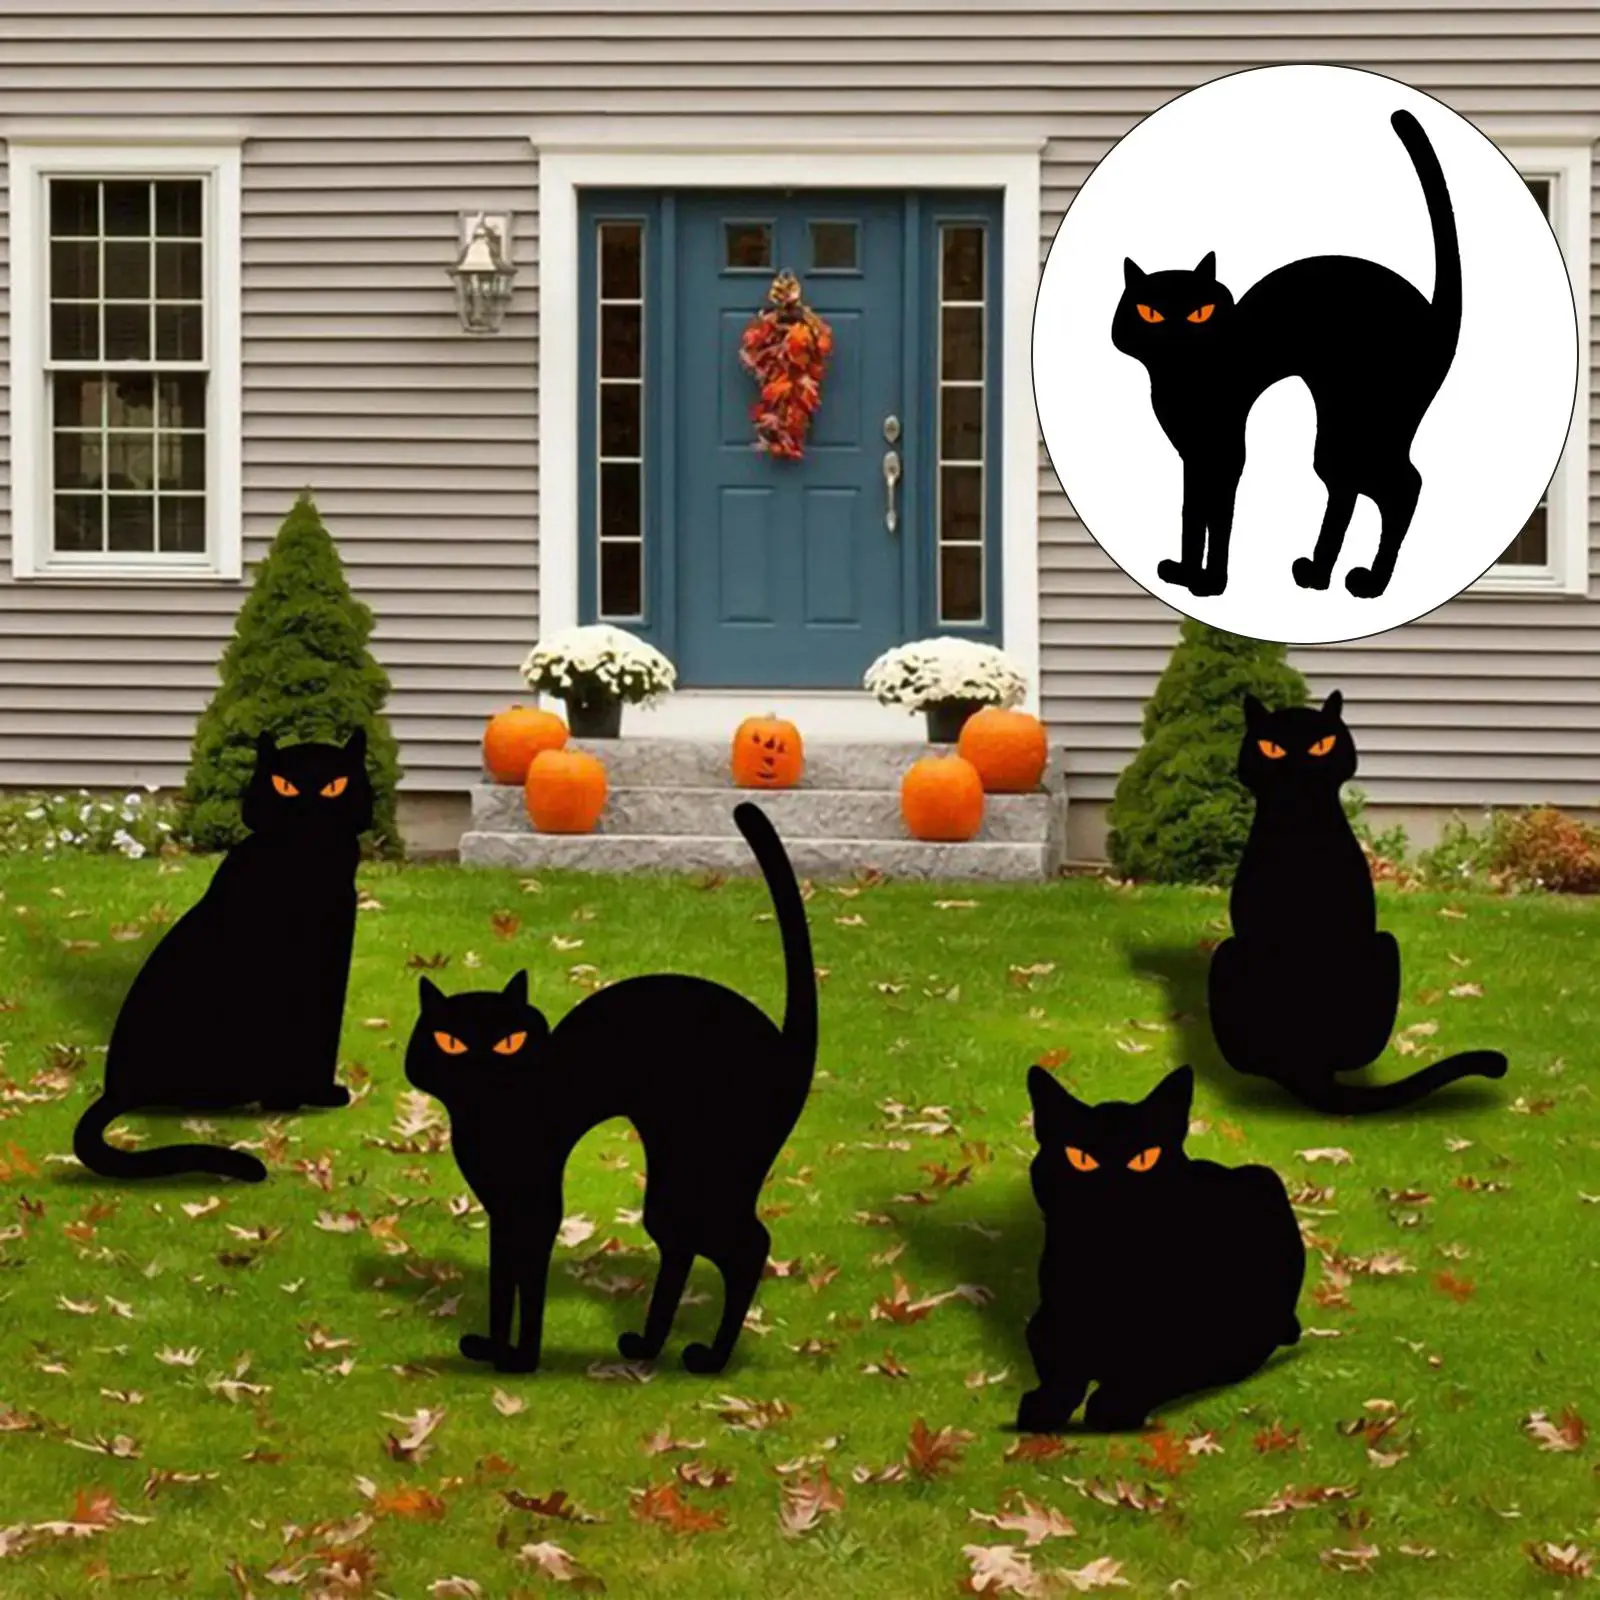 Black Cat Silhouette Garden Stakes Halloween Decorative Party Props Gifts Metal Animal Scary Statues Ornament for Yard Art Lawn